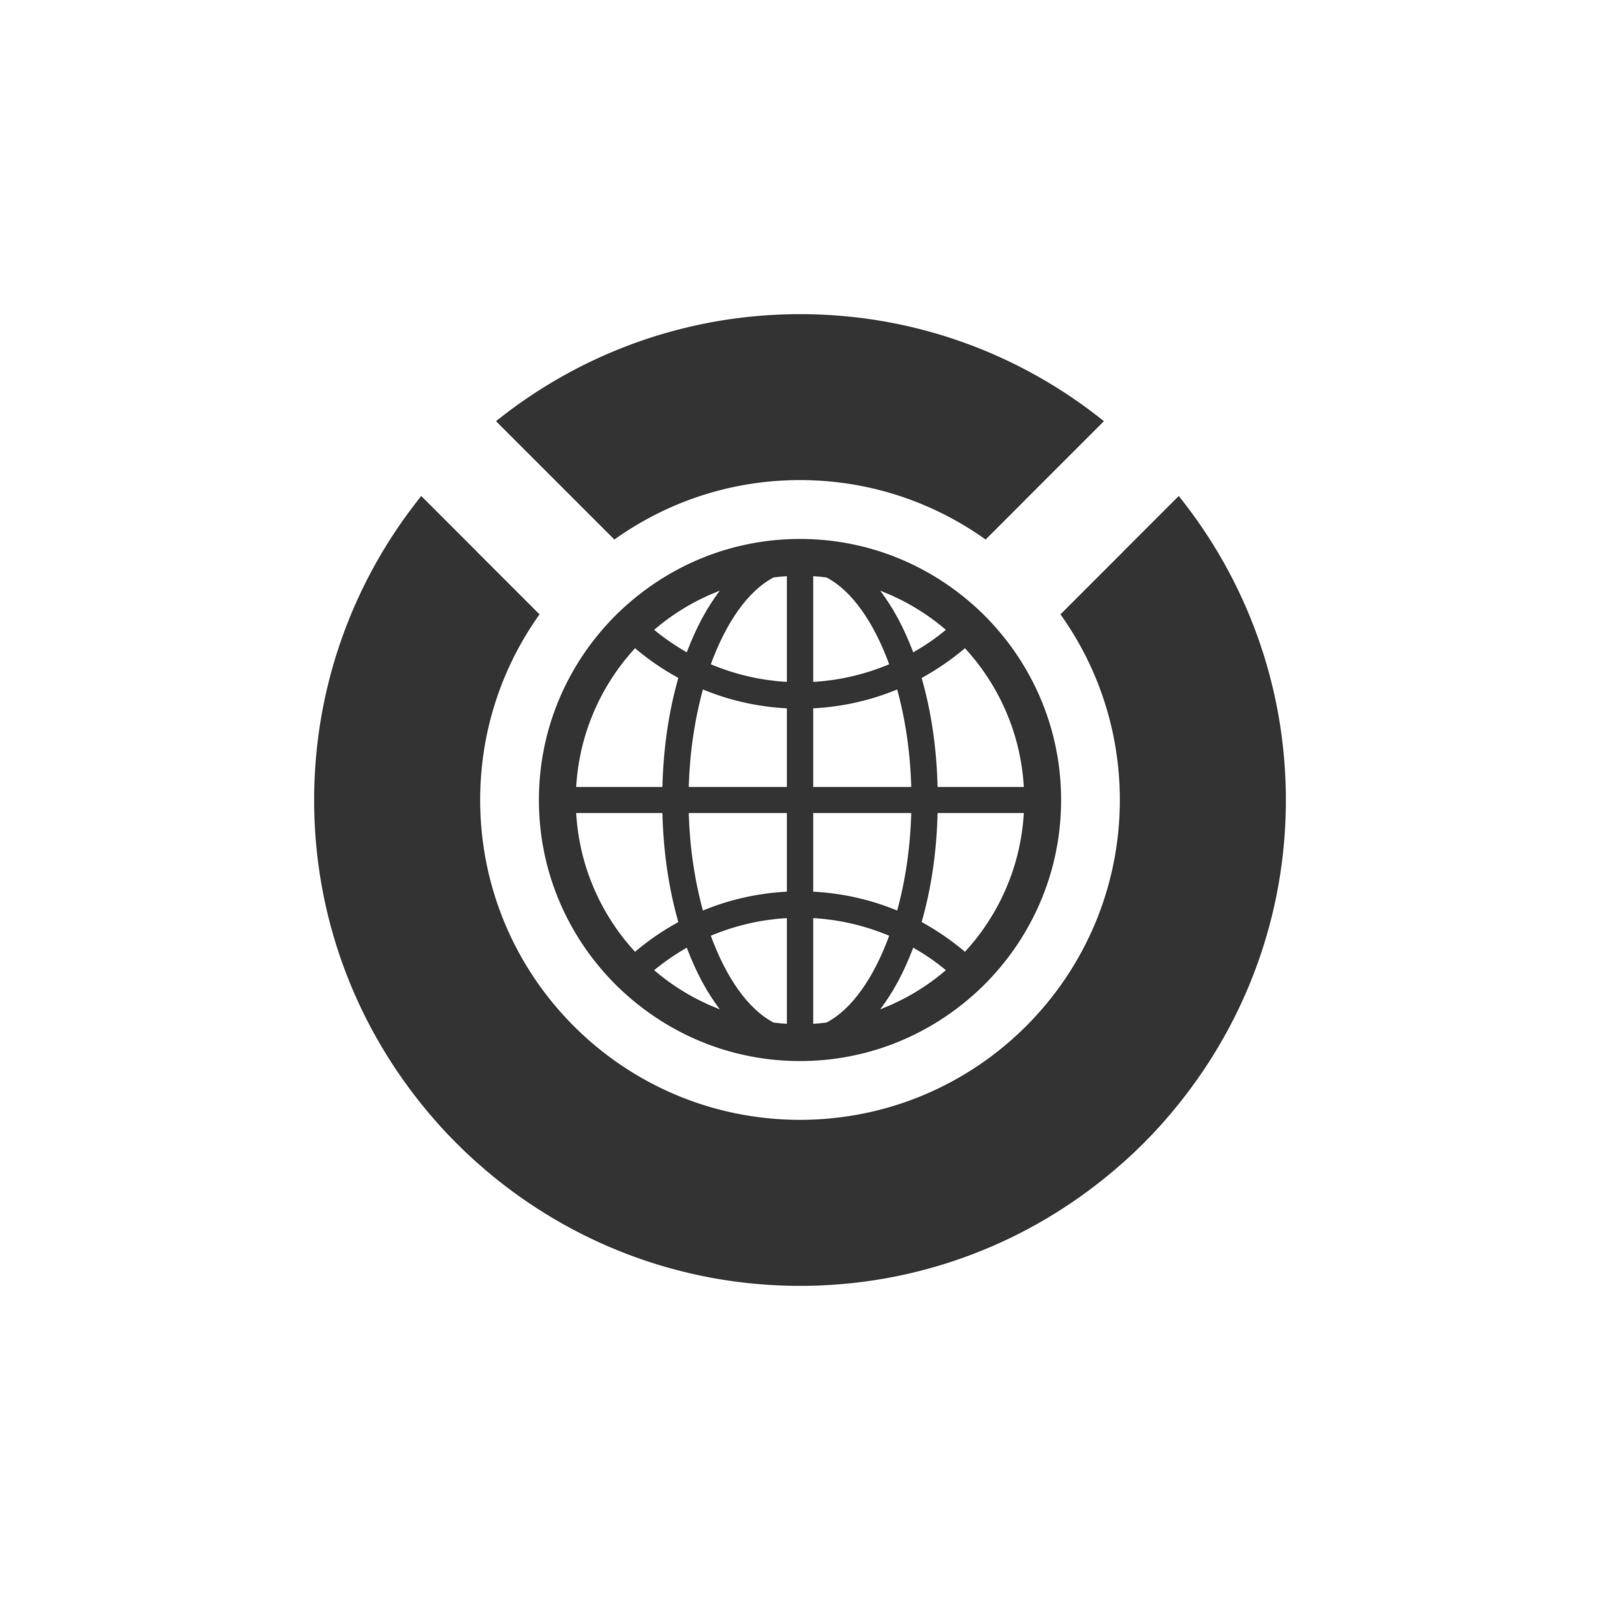 Global economics report icon  by delwar018